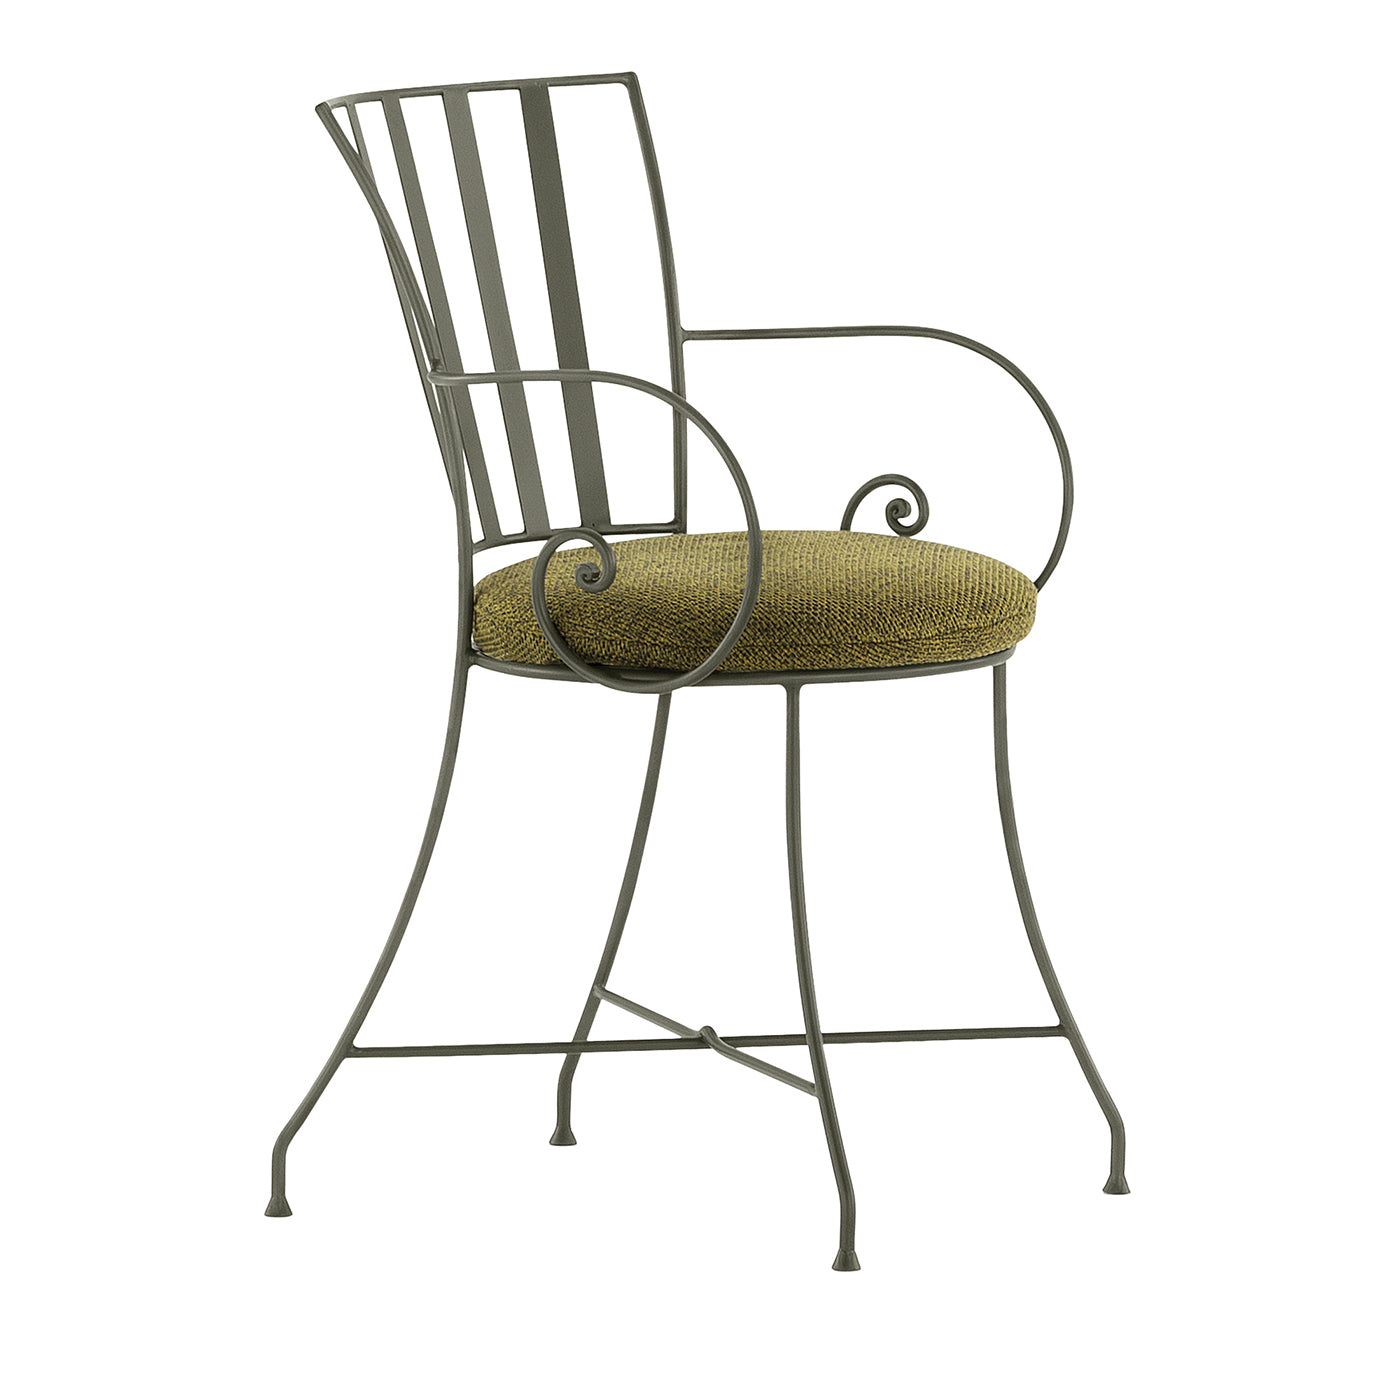 Attonita Wrought Iron Green Chair With Armrests - Main view